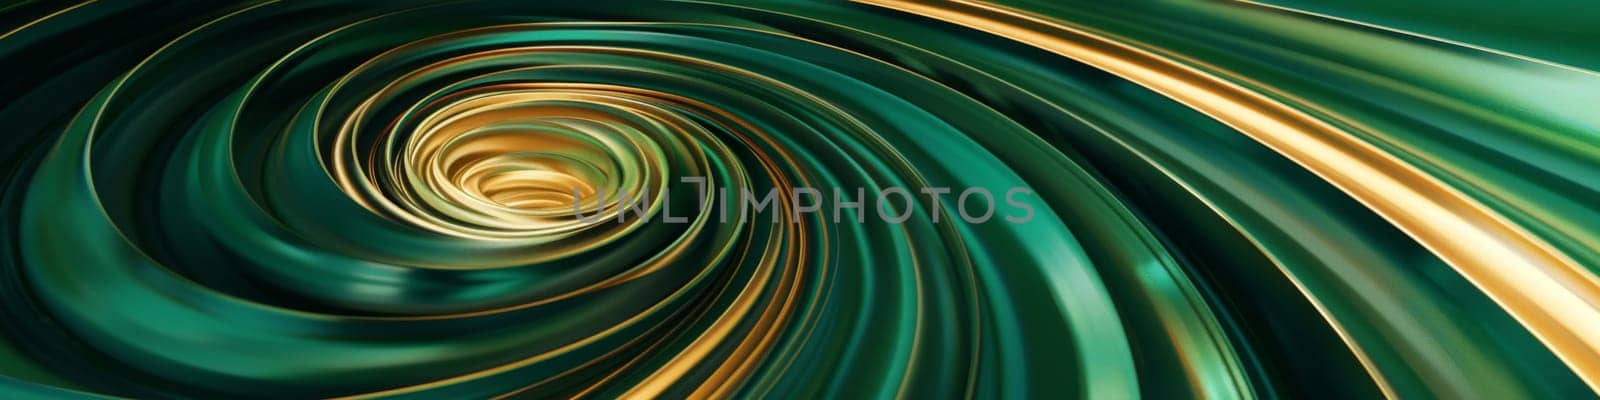 Abstract spiral background with a green and gold color as background or texture